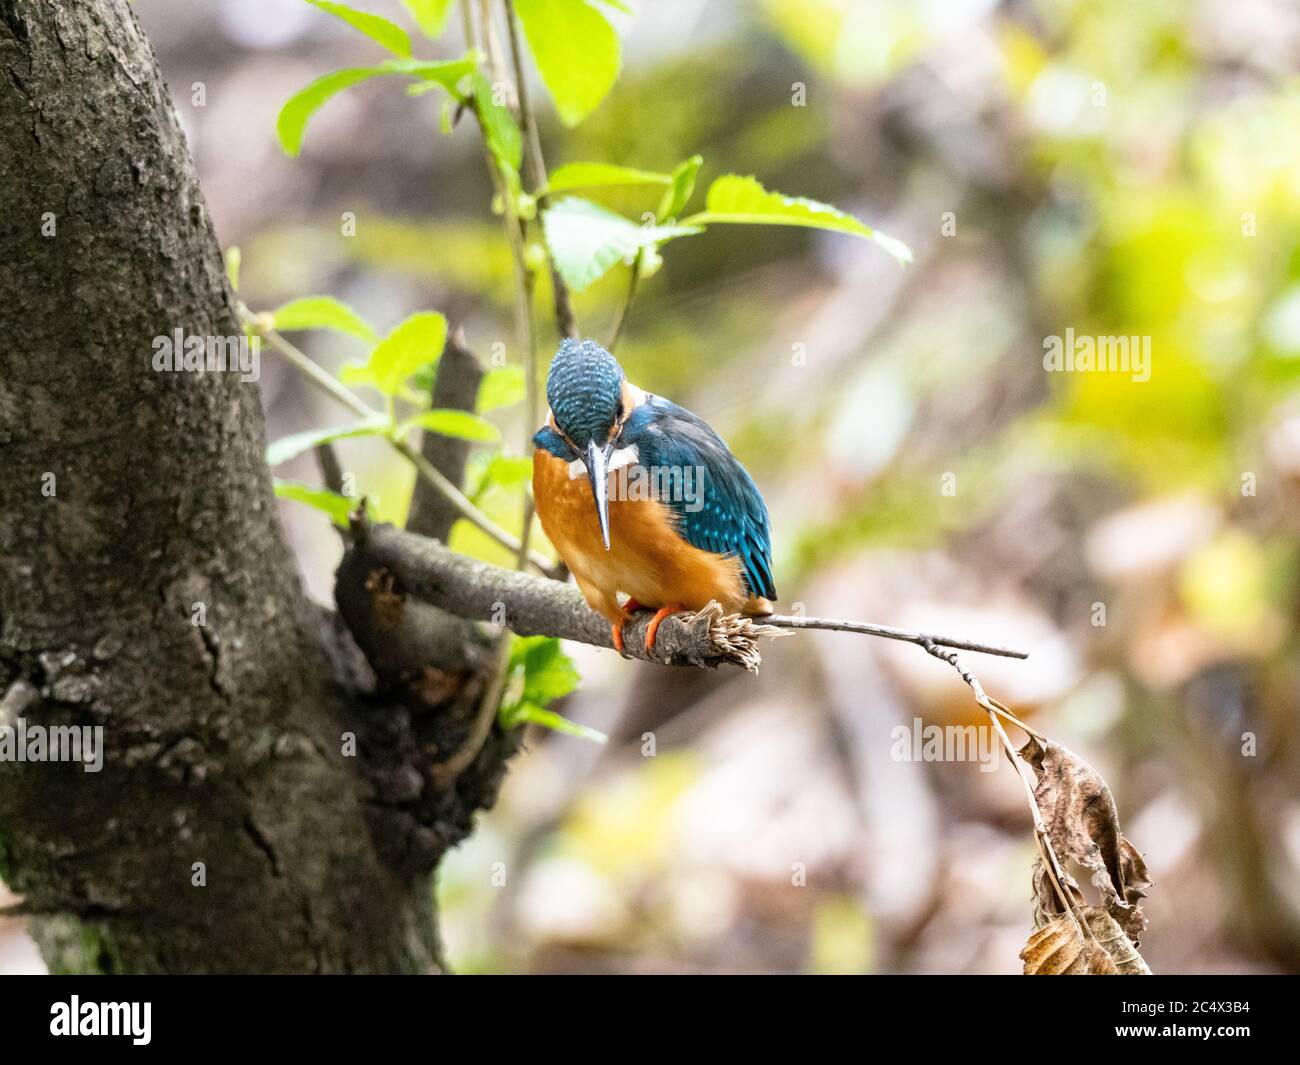 A colorful common kingfisher, Alcedo atthis bengalensis, perches in a tree branch while fishing in a small park pond near Yokohama, Japan. Stock Photo